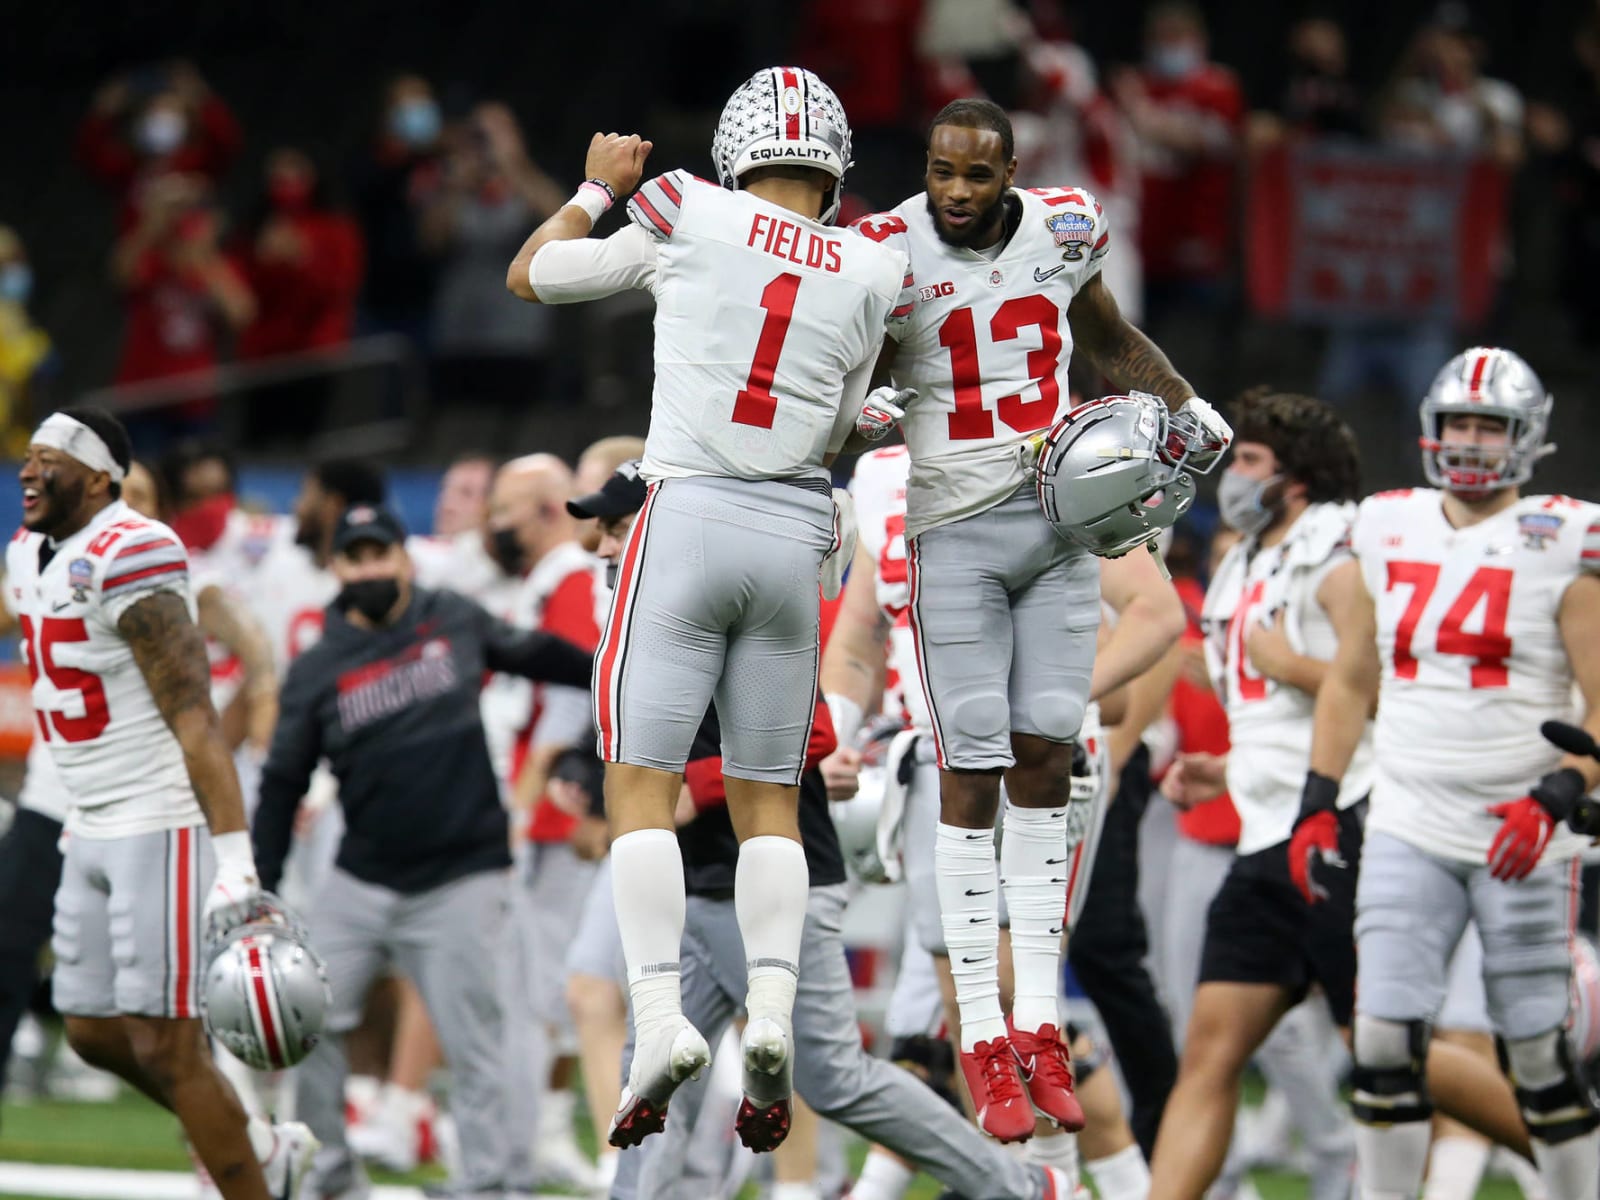 LeBron James sends incredible gift to every Ohio State player